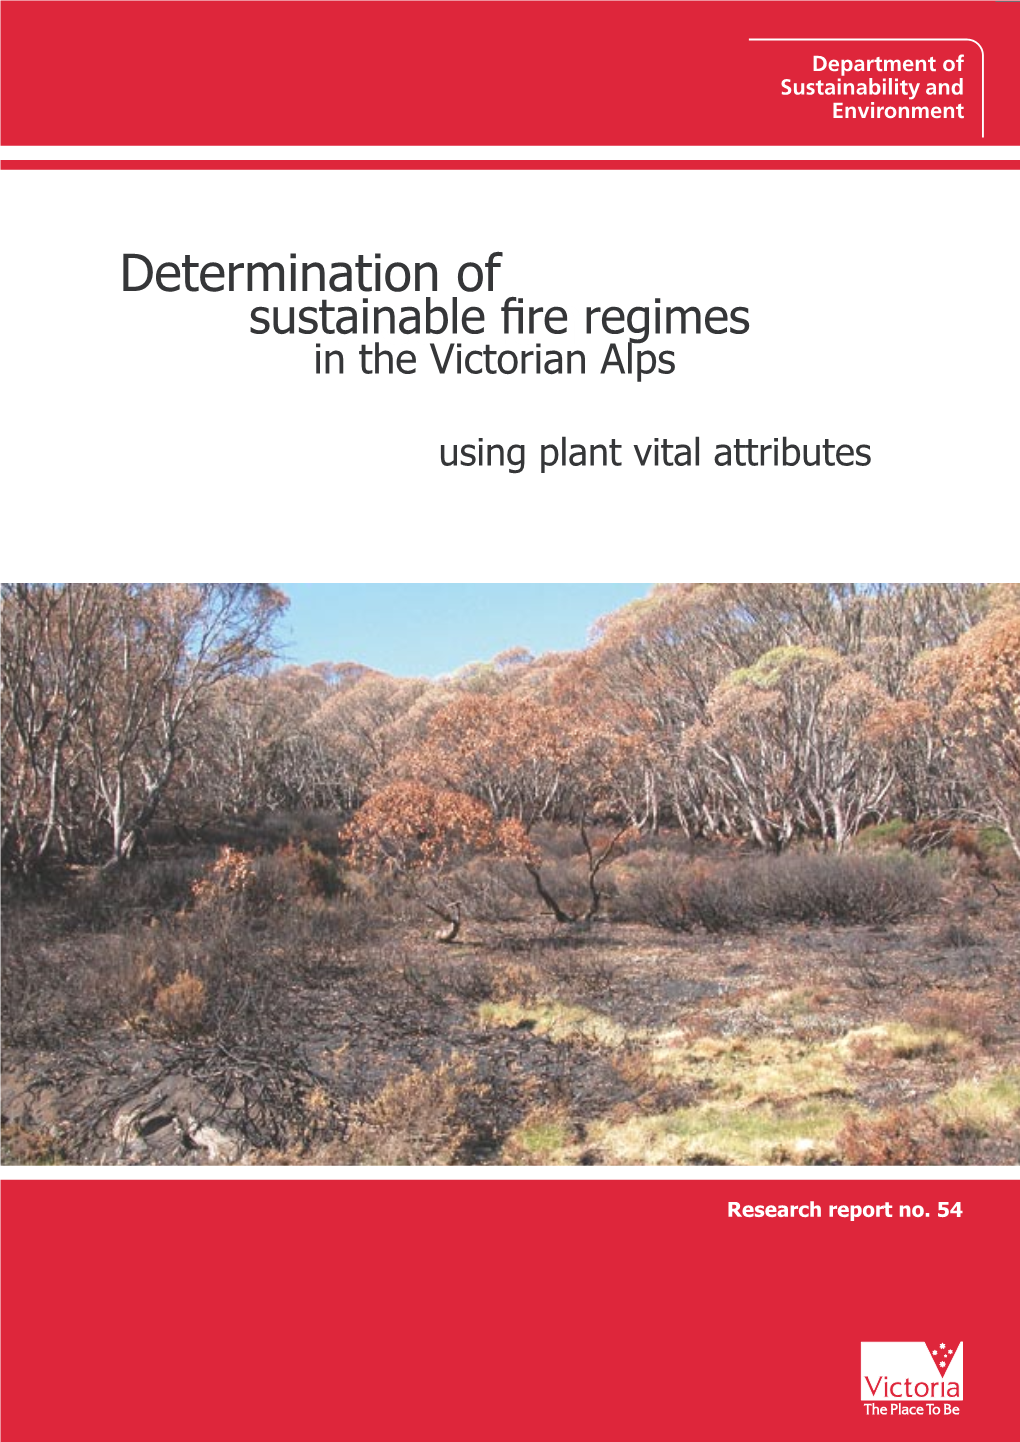 Determination of Sustainable Fire Regimes in the Victorian Alps Using Plant Vital Attributes